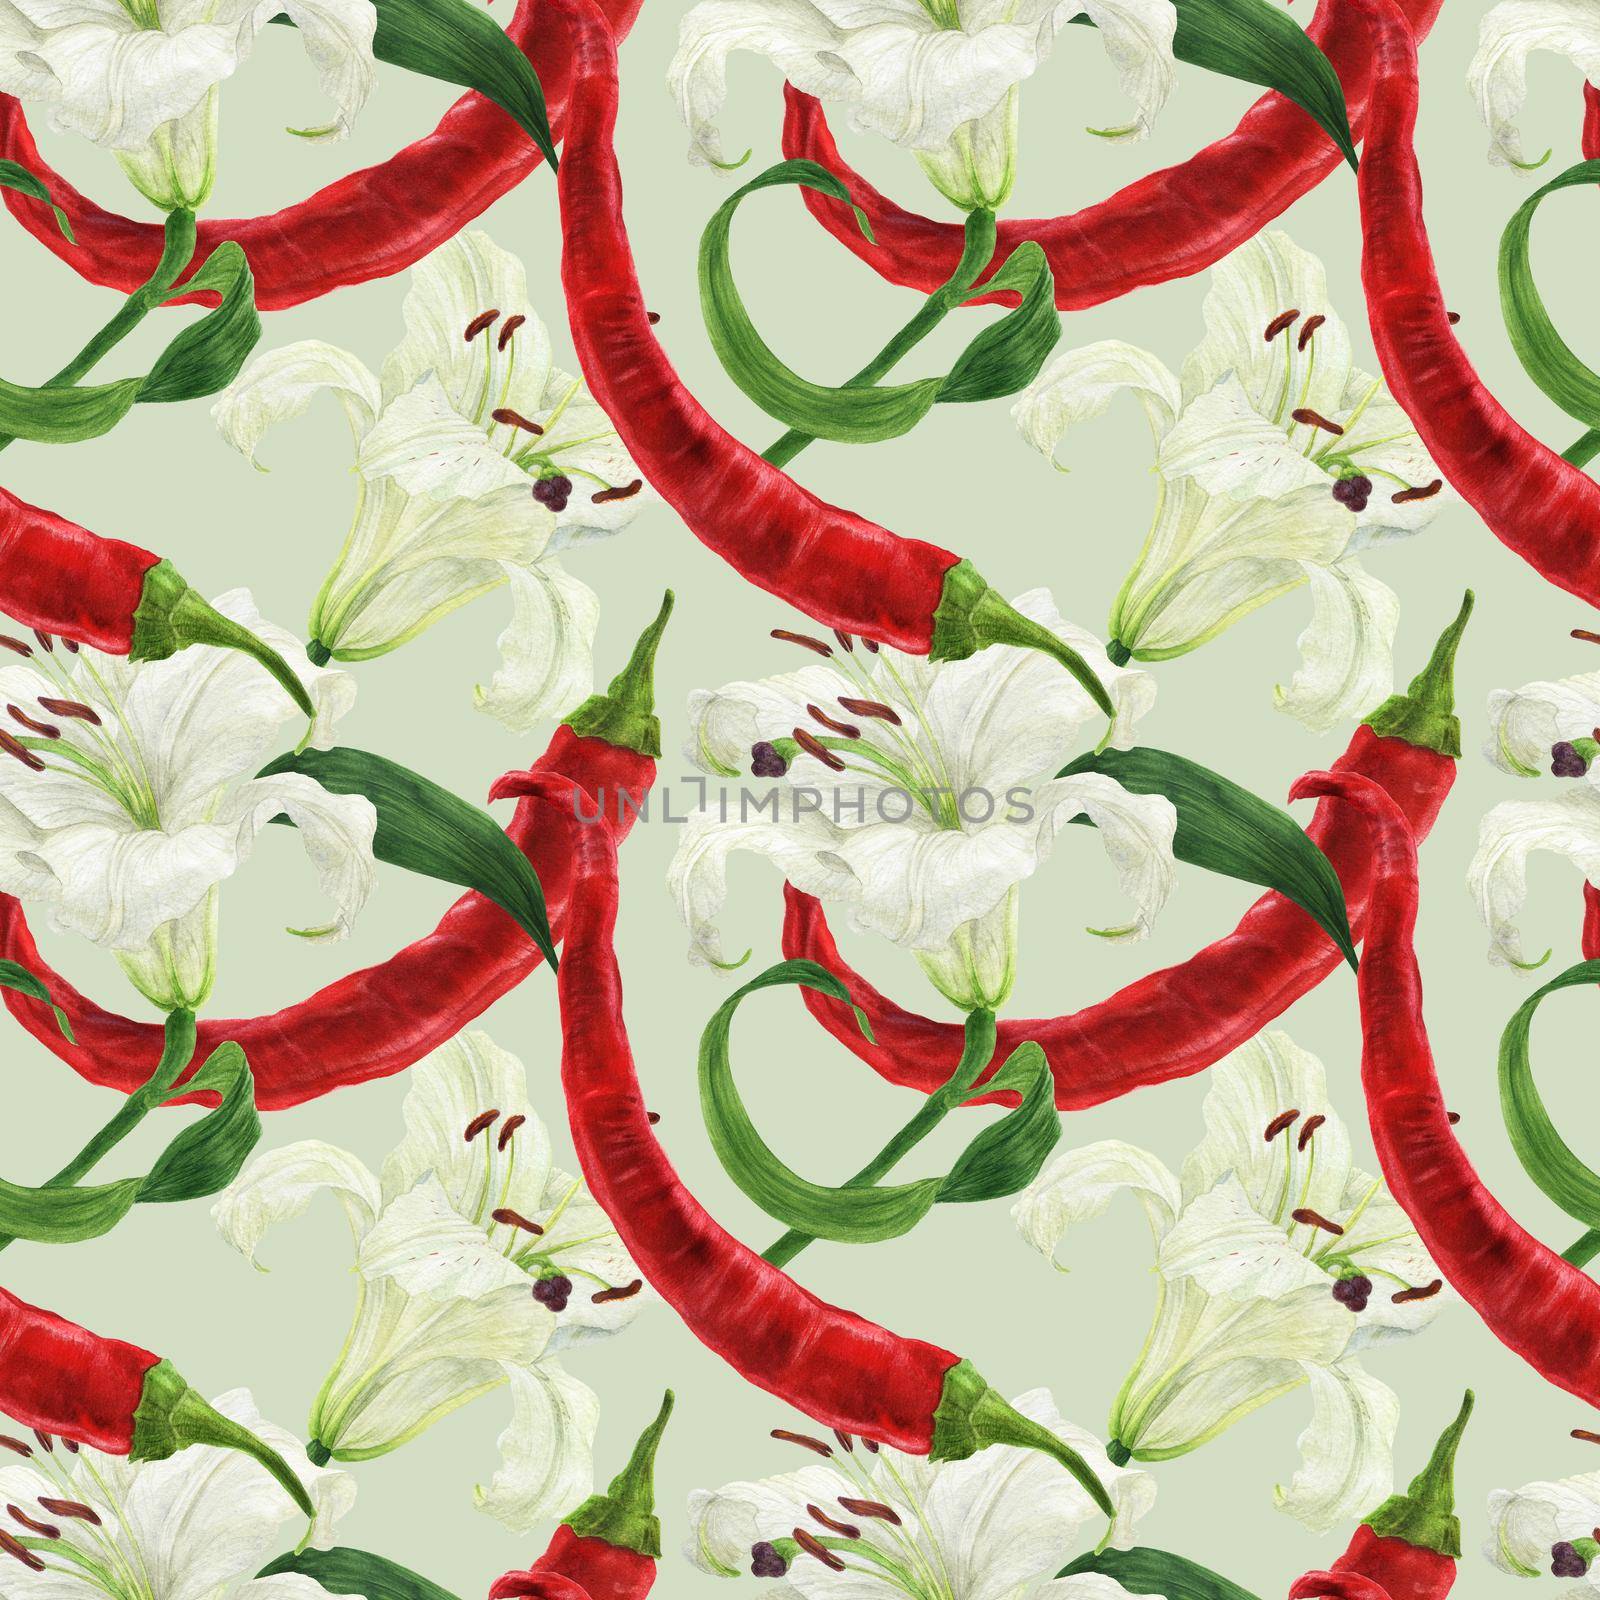 Red chili pepper and lily white flower watercolor light green seamless pattern with clipping path